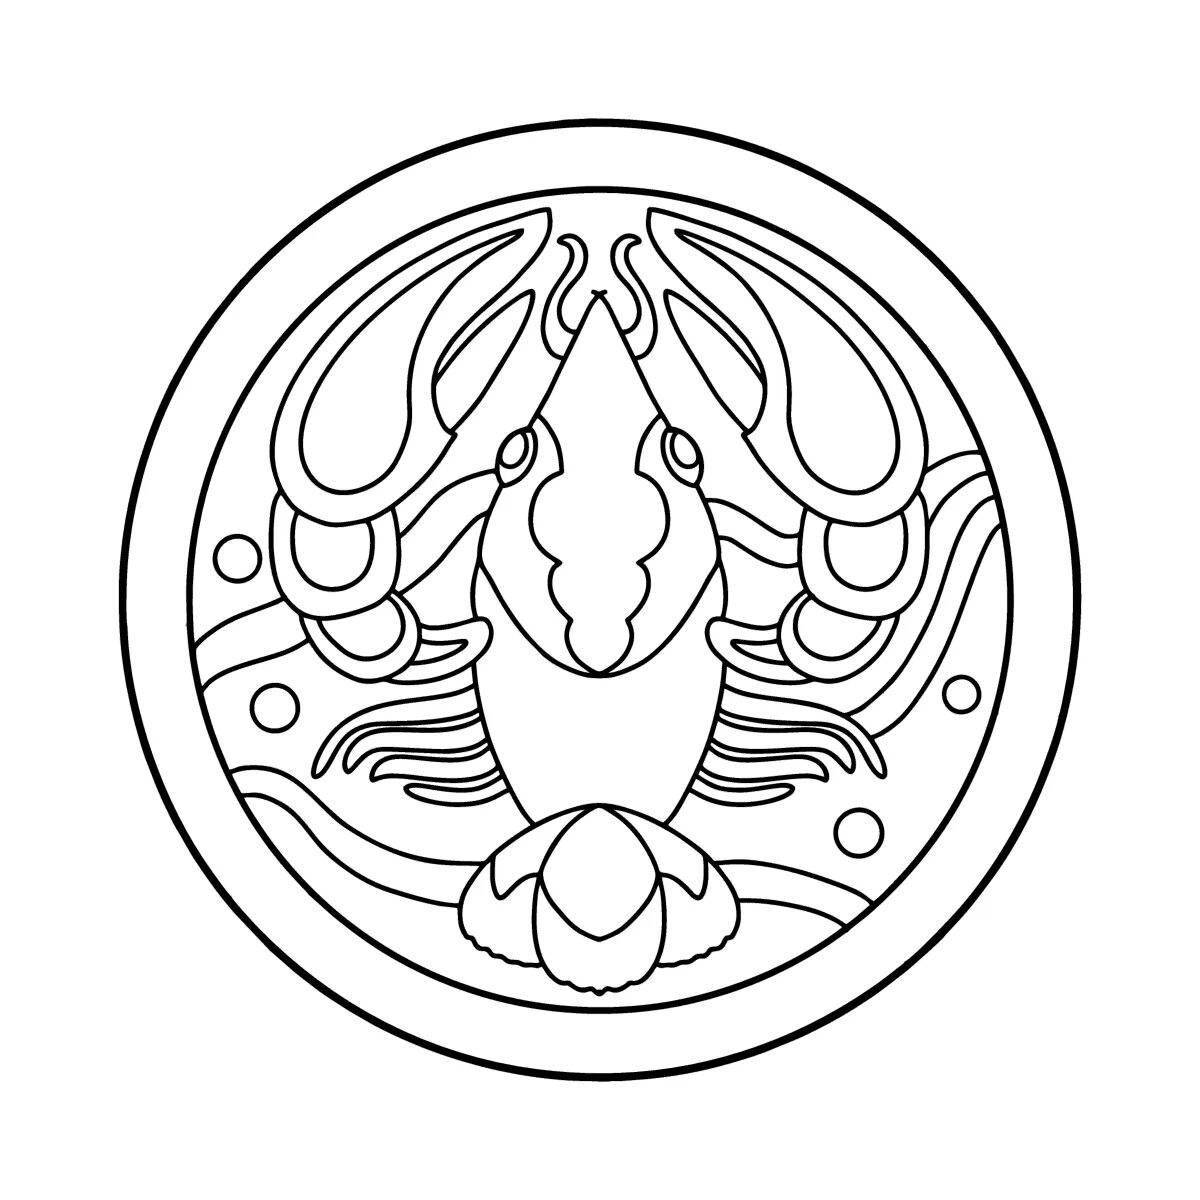 Gorgeous cancer coloring page